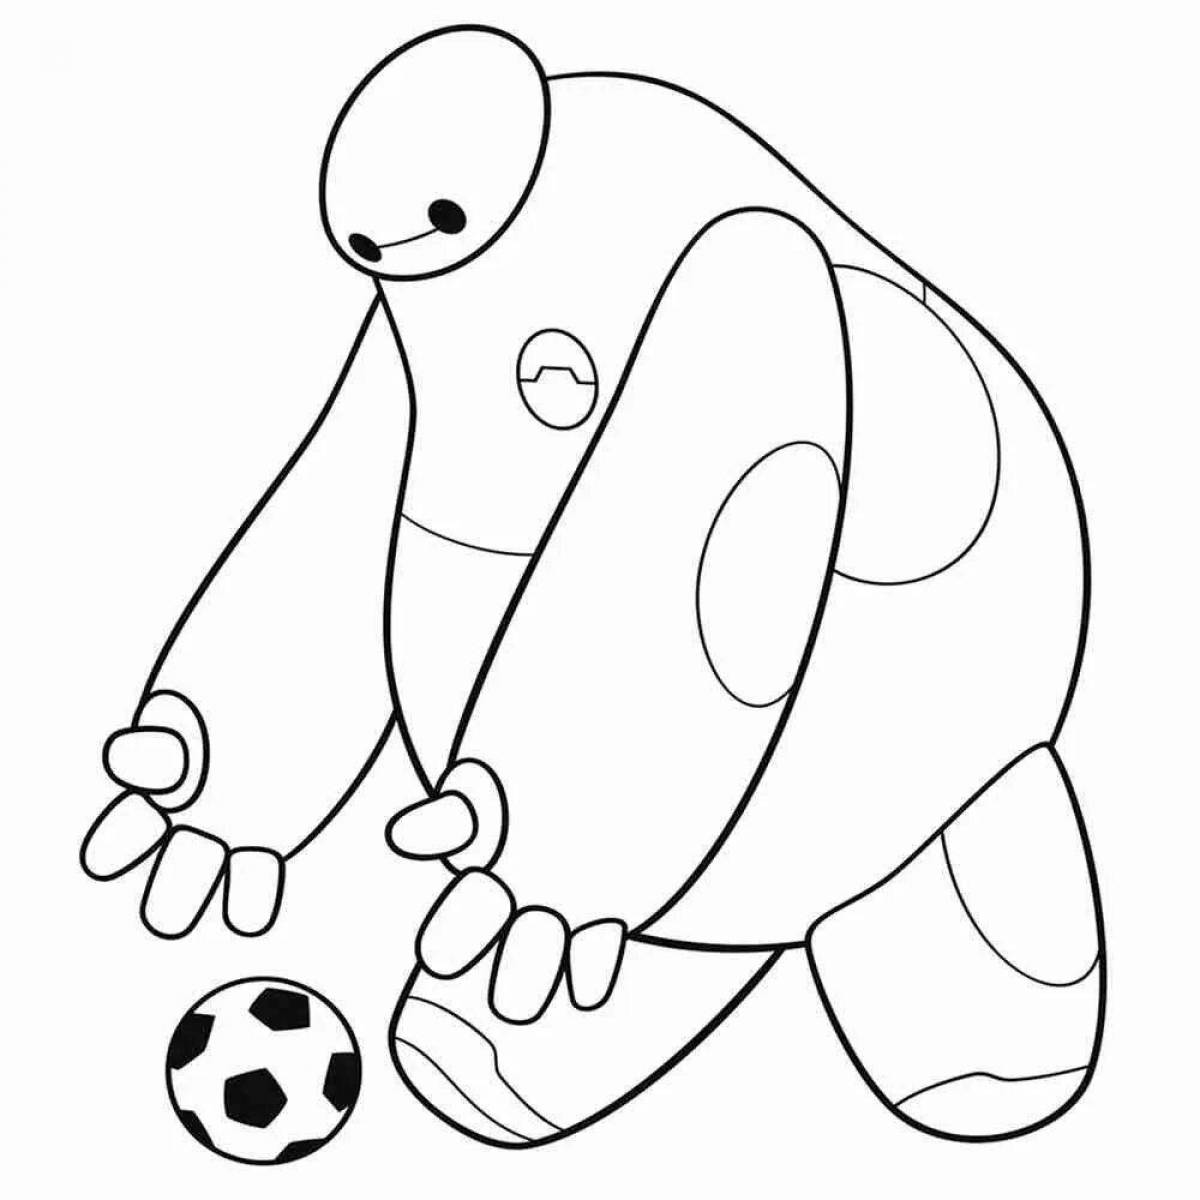 Glowing Baymax coloring page